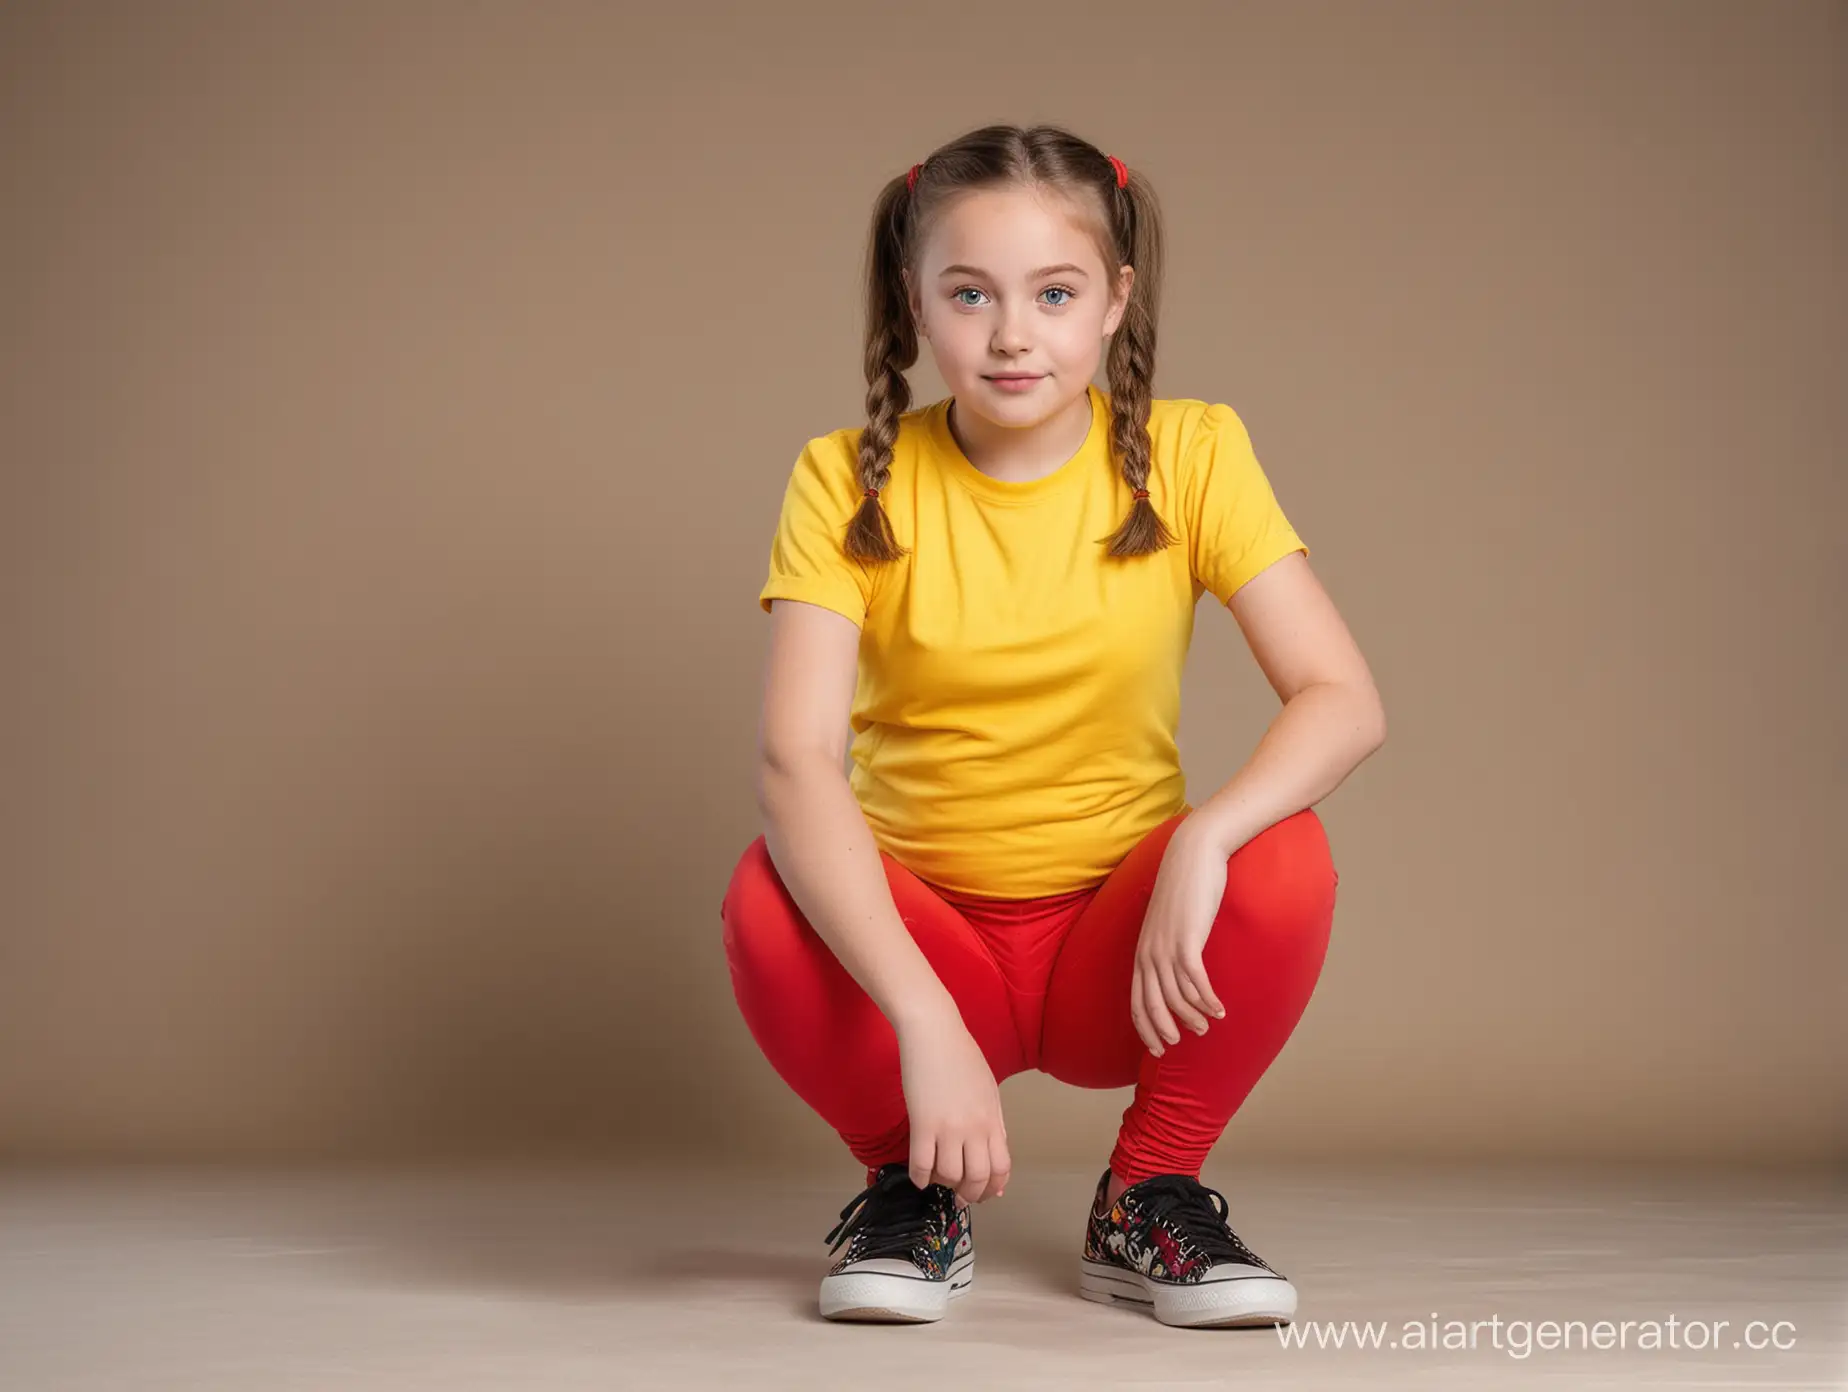 Adorable-TwelveYearOld-Girl-in-Red-and-Yellow-Squatting-Pose